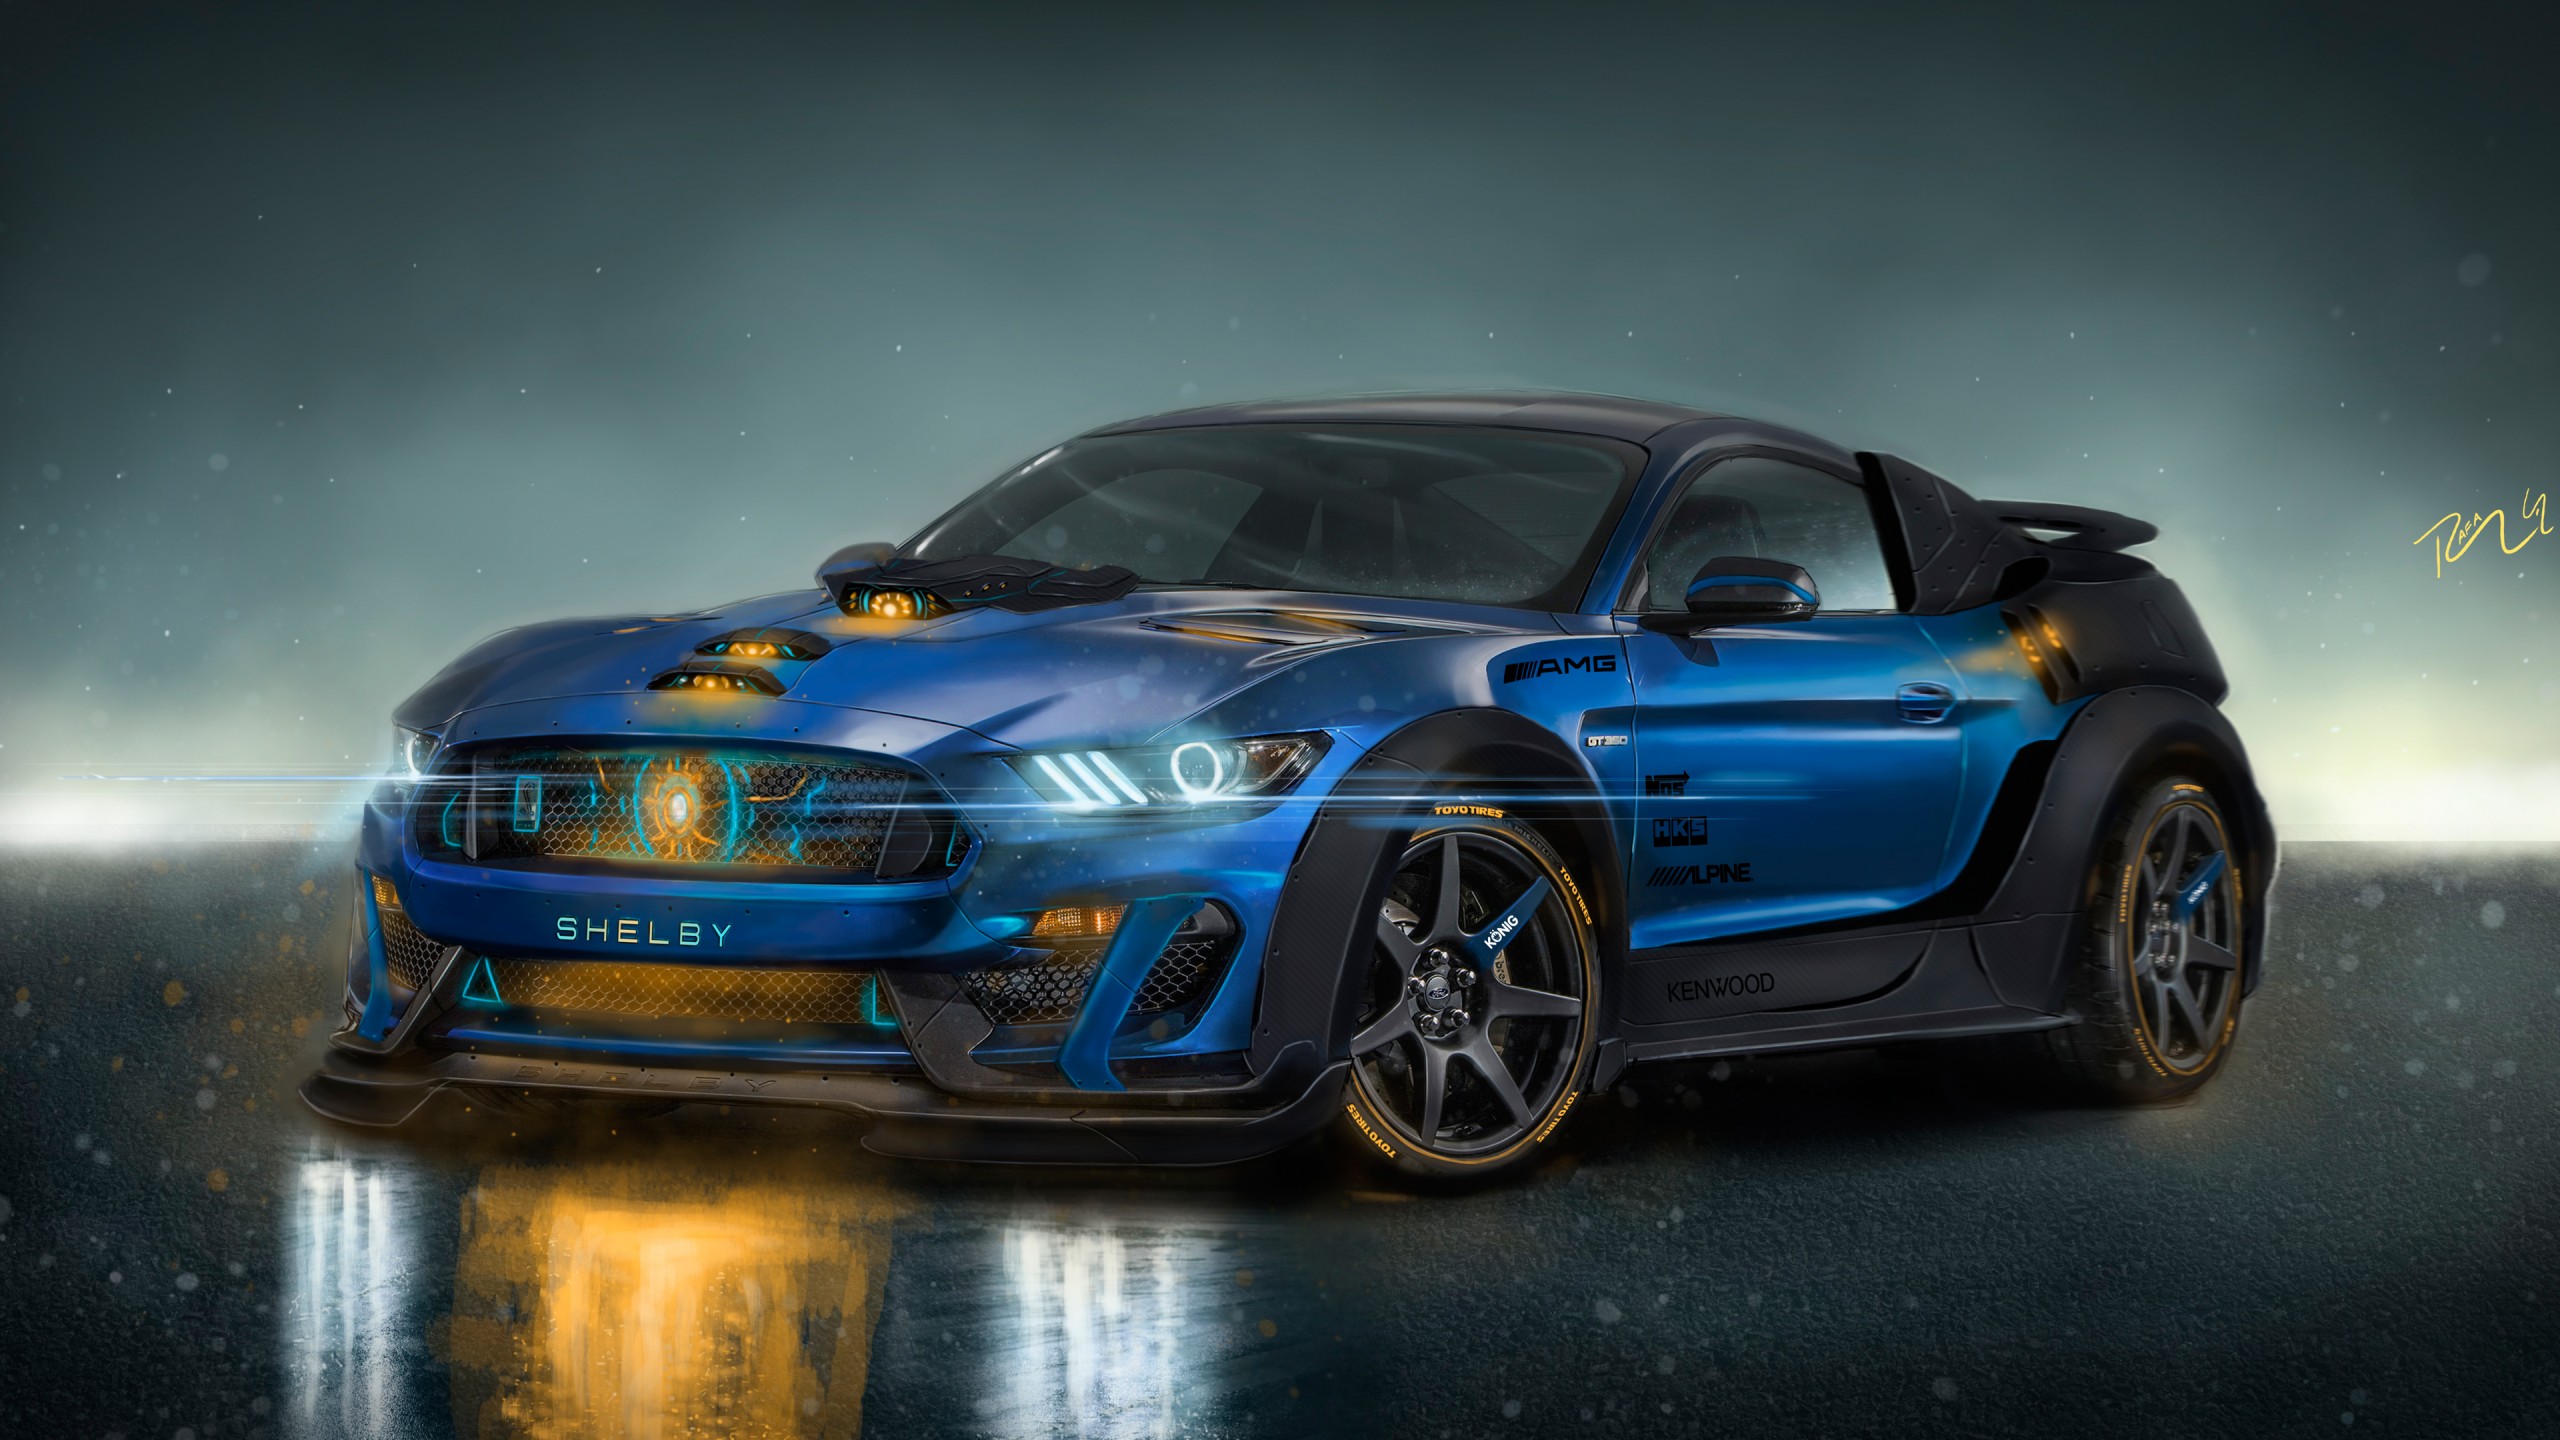 Car Ford Mustang Shelby Vehicle Blue Cars Headlights 2560x1440